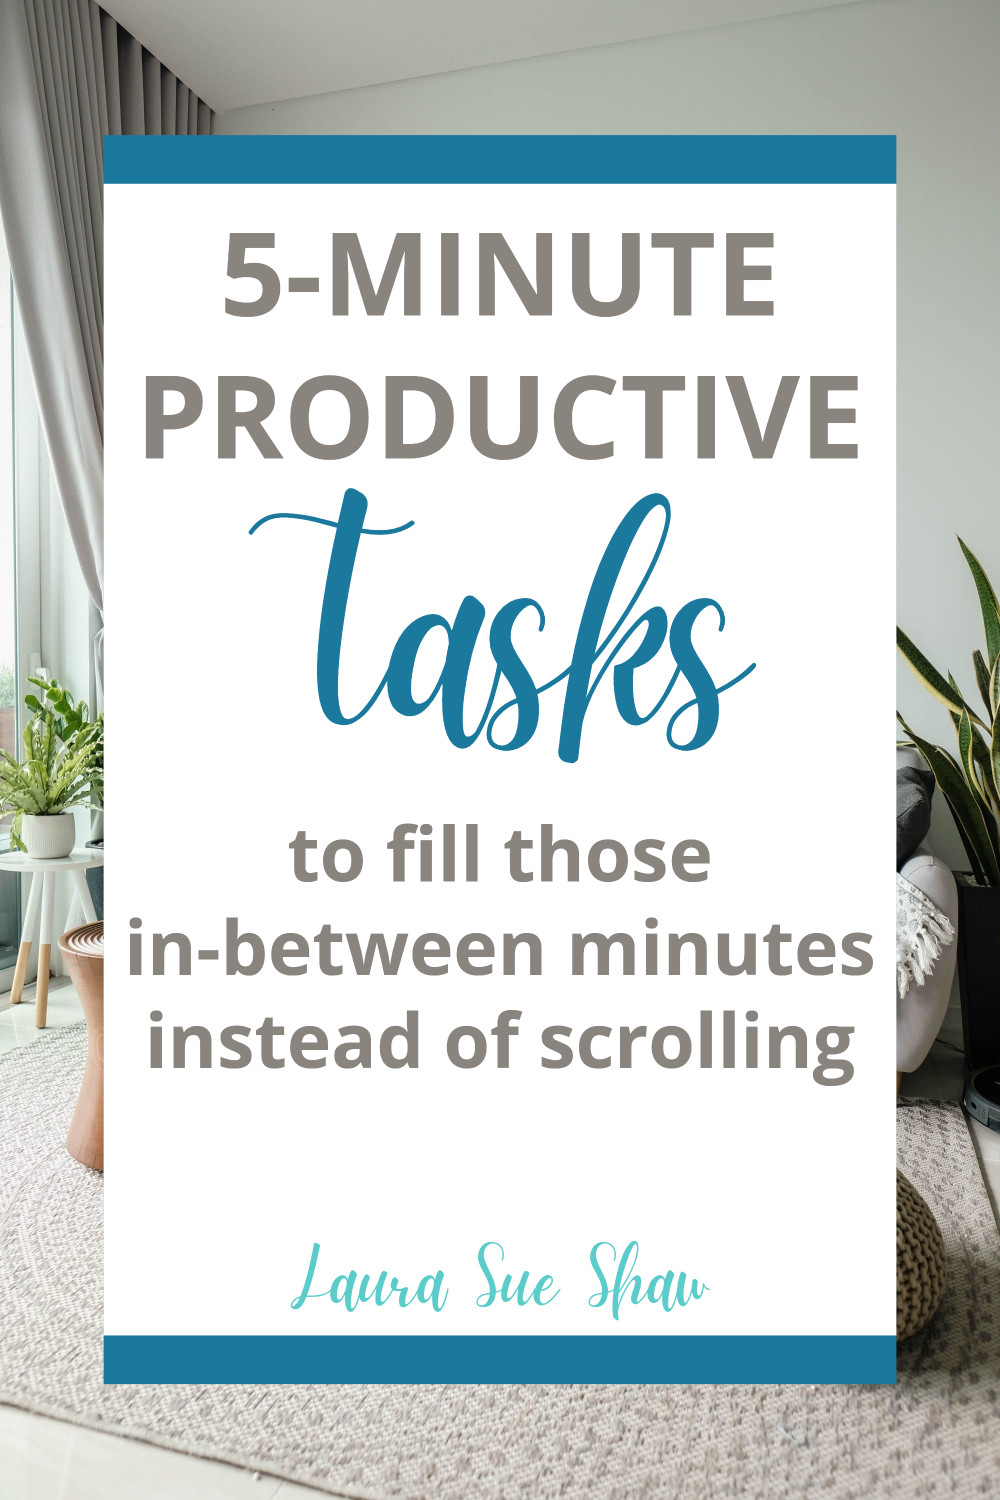 Use those "in-between" moments in a smart way with this list of productive tasks that take just 5 minutes or less.